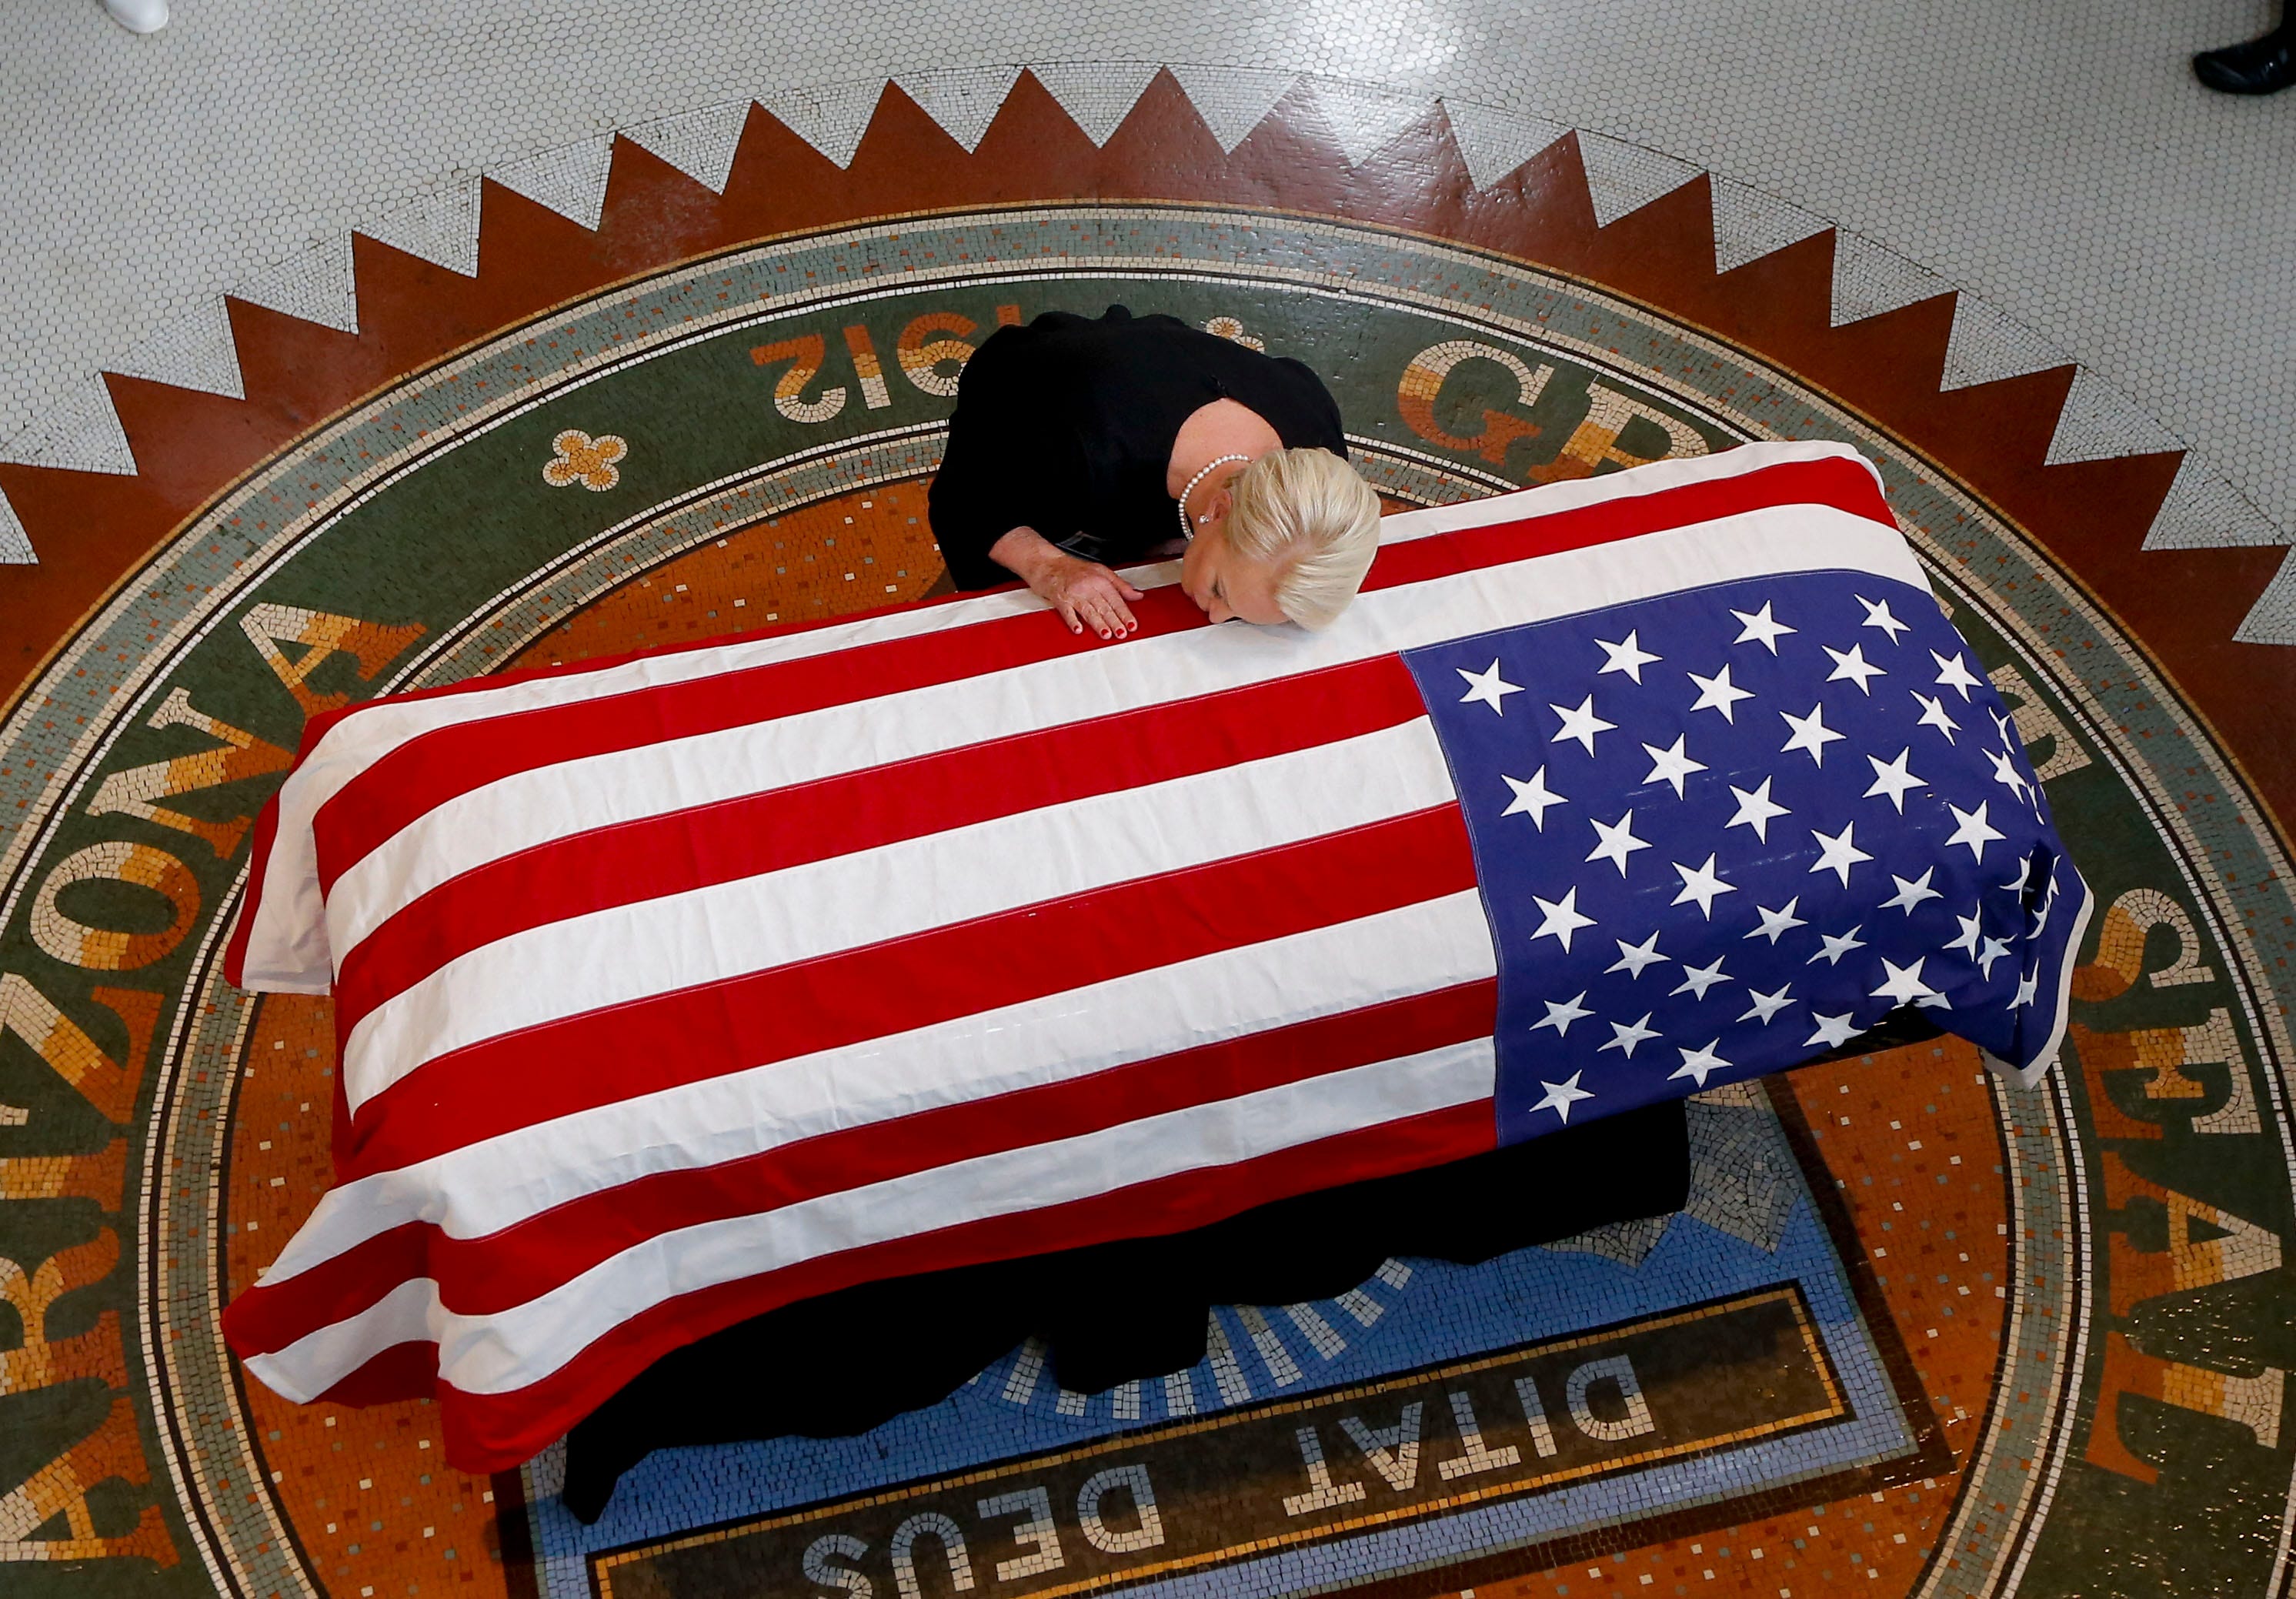 Cindy McCain, wife of Sen. John McCain (R-AZ) touches the casket during his memorial service at the Capitol on Aug. 29, 2018 in Phoenix, Ariz. Sen. McCain, a decorated war hero, died Aug. 25 at the age of 81 after a long battle with Glioblastoma, a f